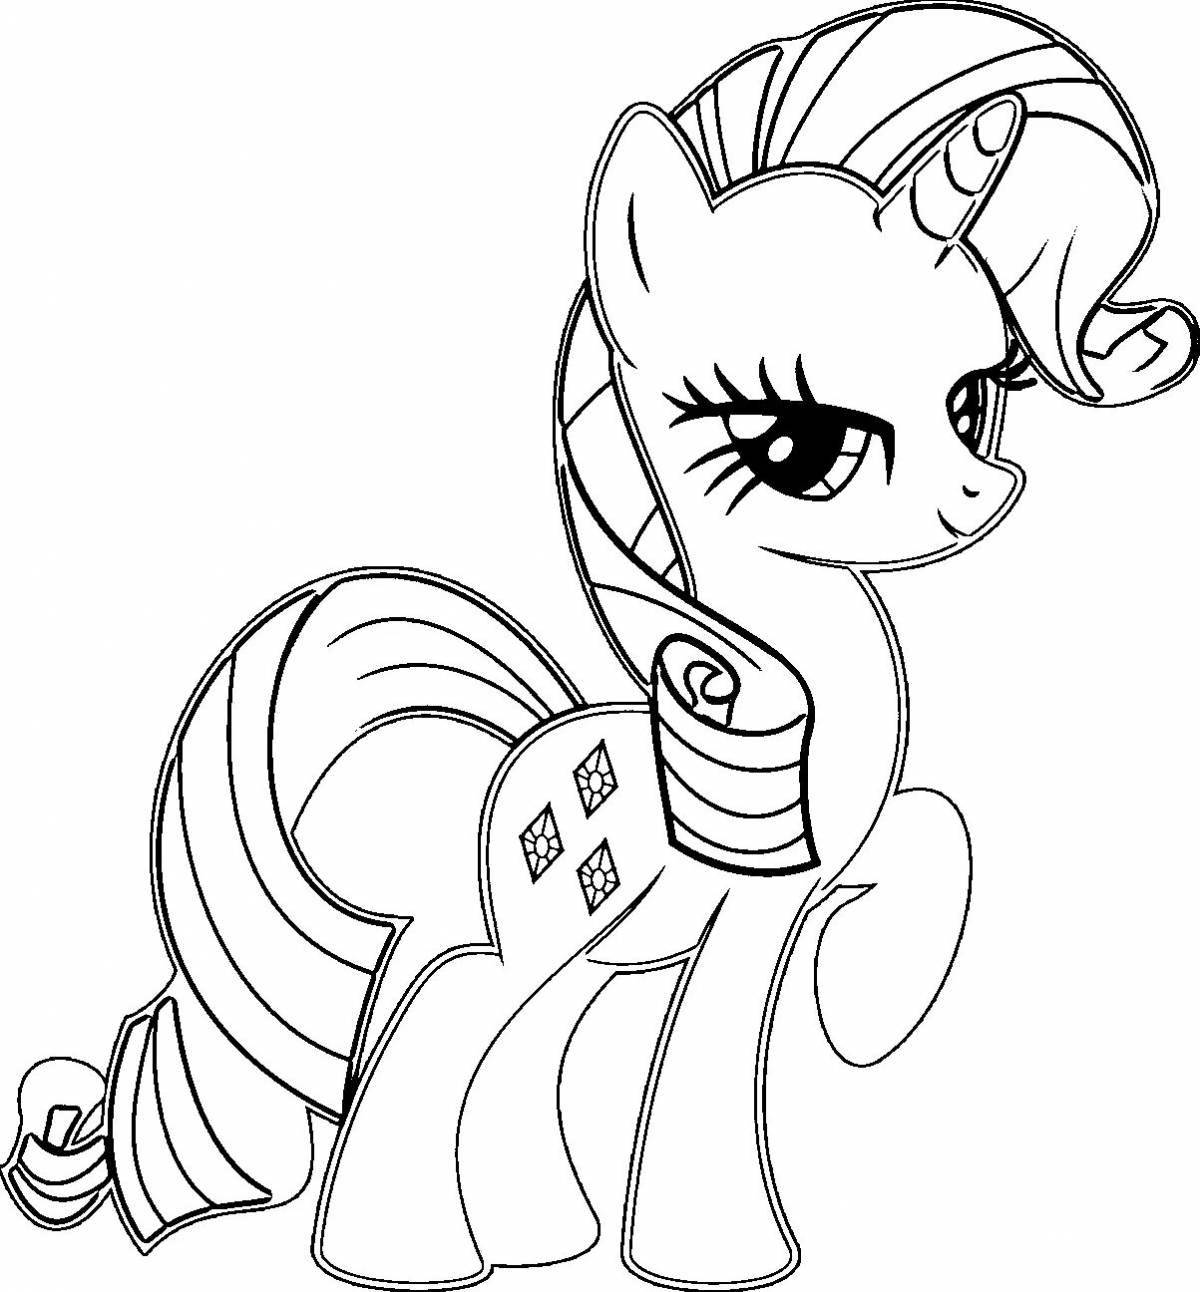 Mlp glitter coloring